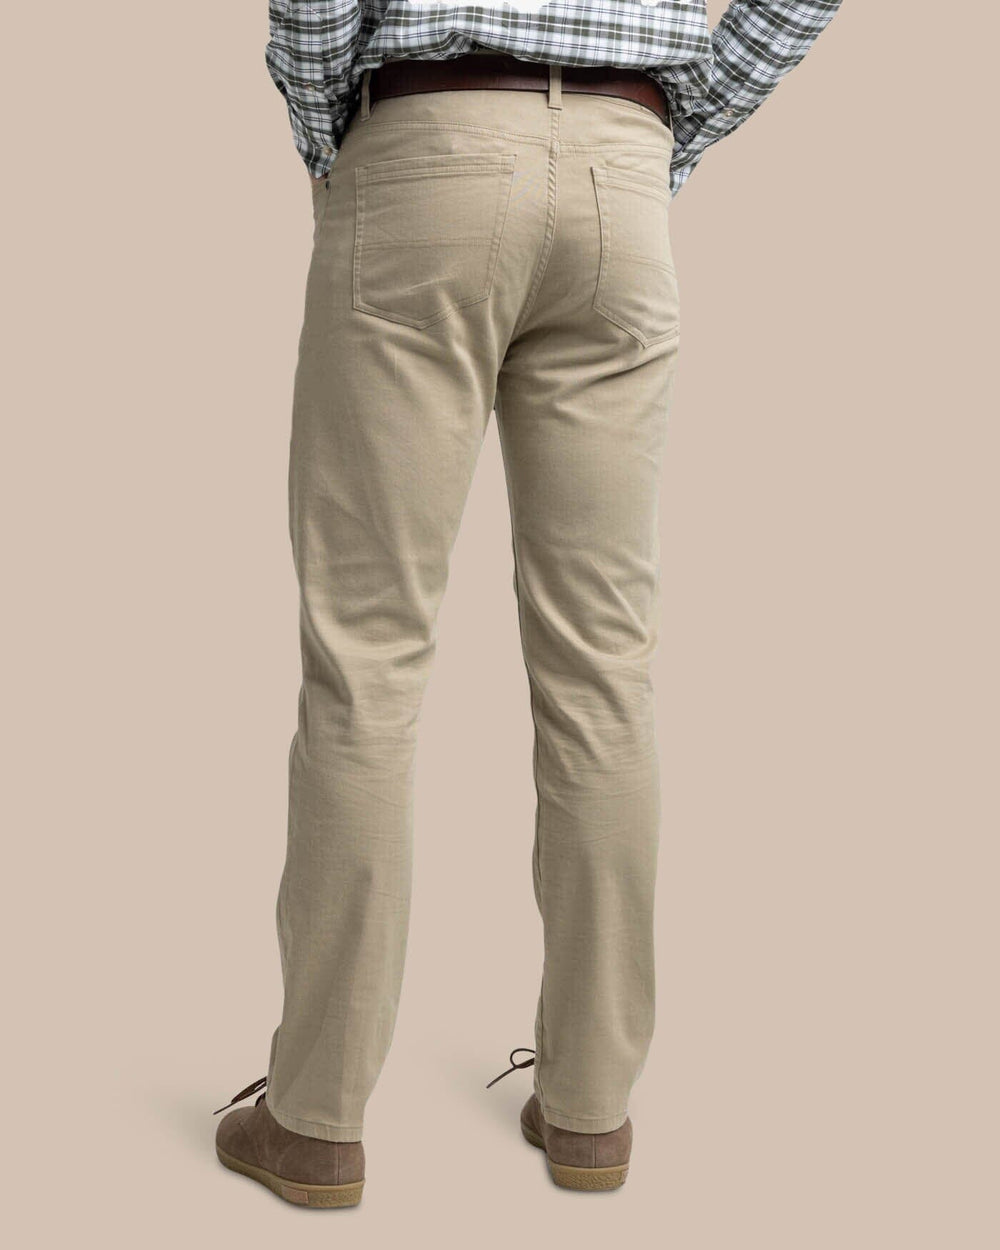 The back view of the Southern Tide Sullivan Five Pocket Pant by Southern Tide - Sandstone Khaki